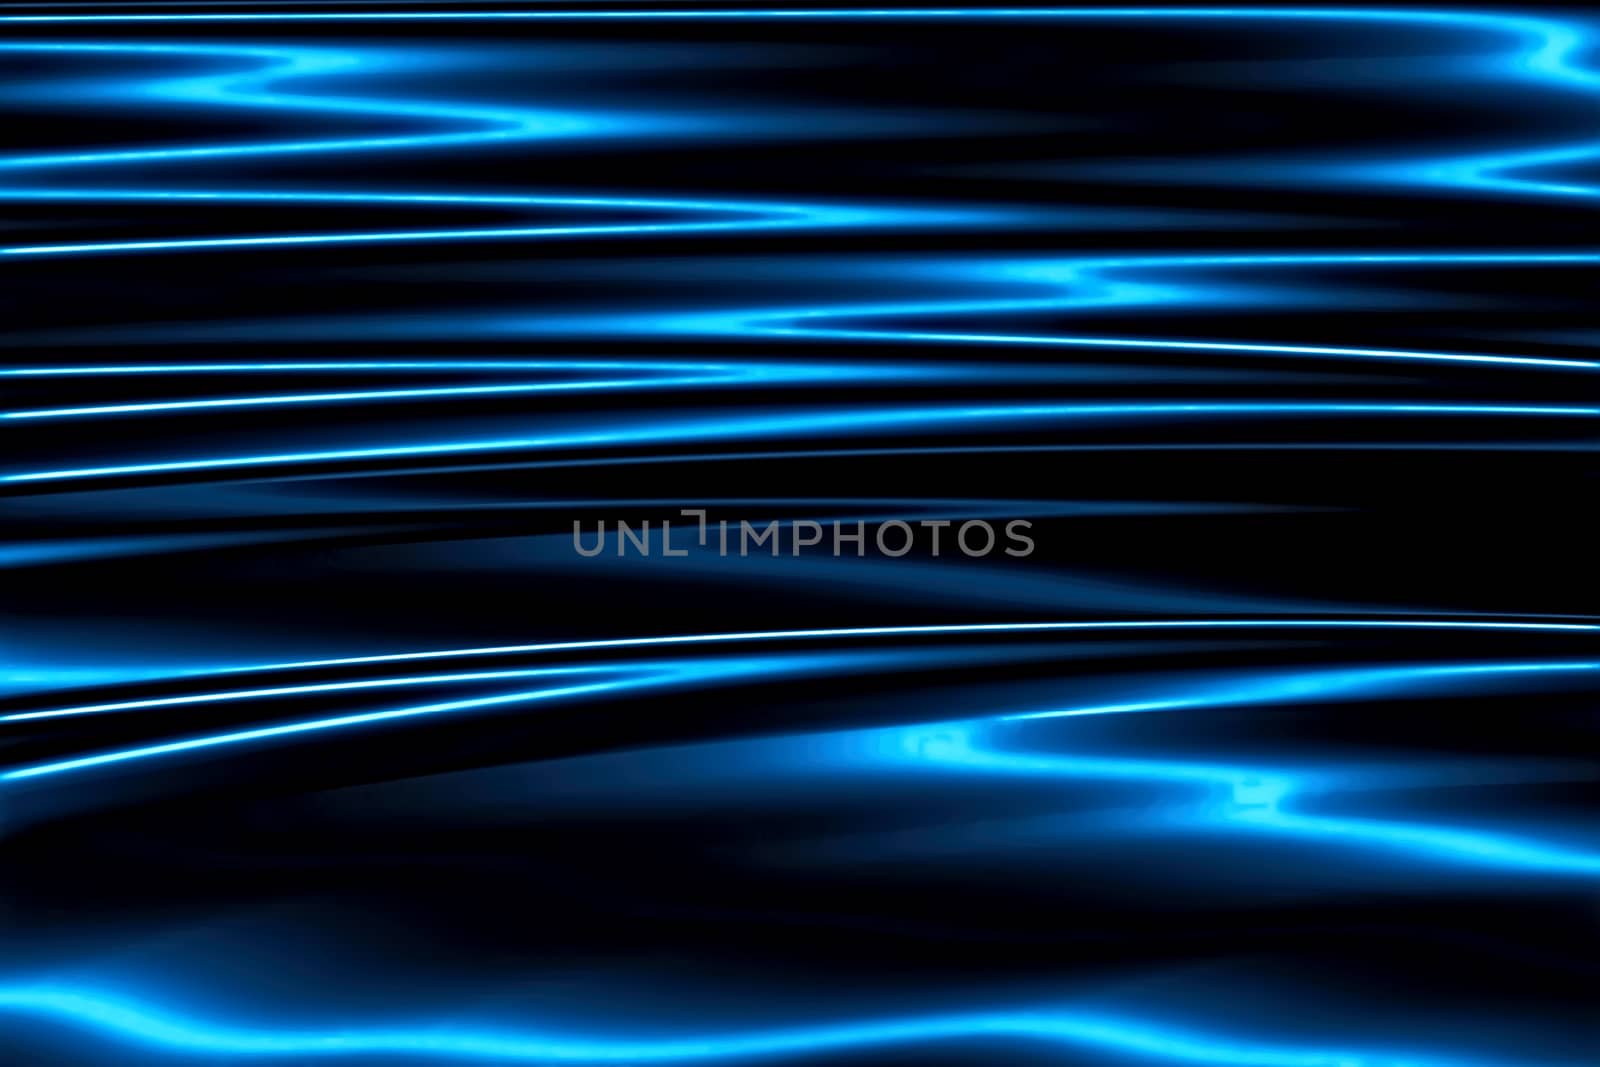 Glossy fractal background - abstract computer-generated image. Digital art: surface with a metallic sheen and deep horizontal folds. For tech and business design projects.